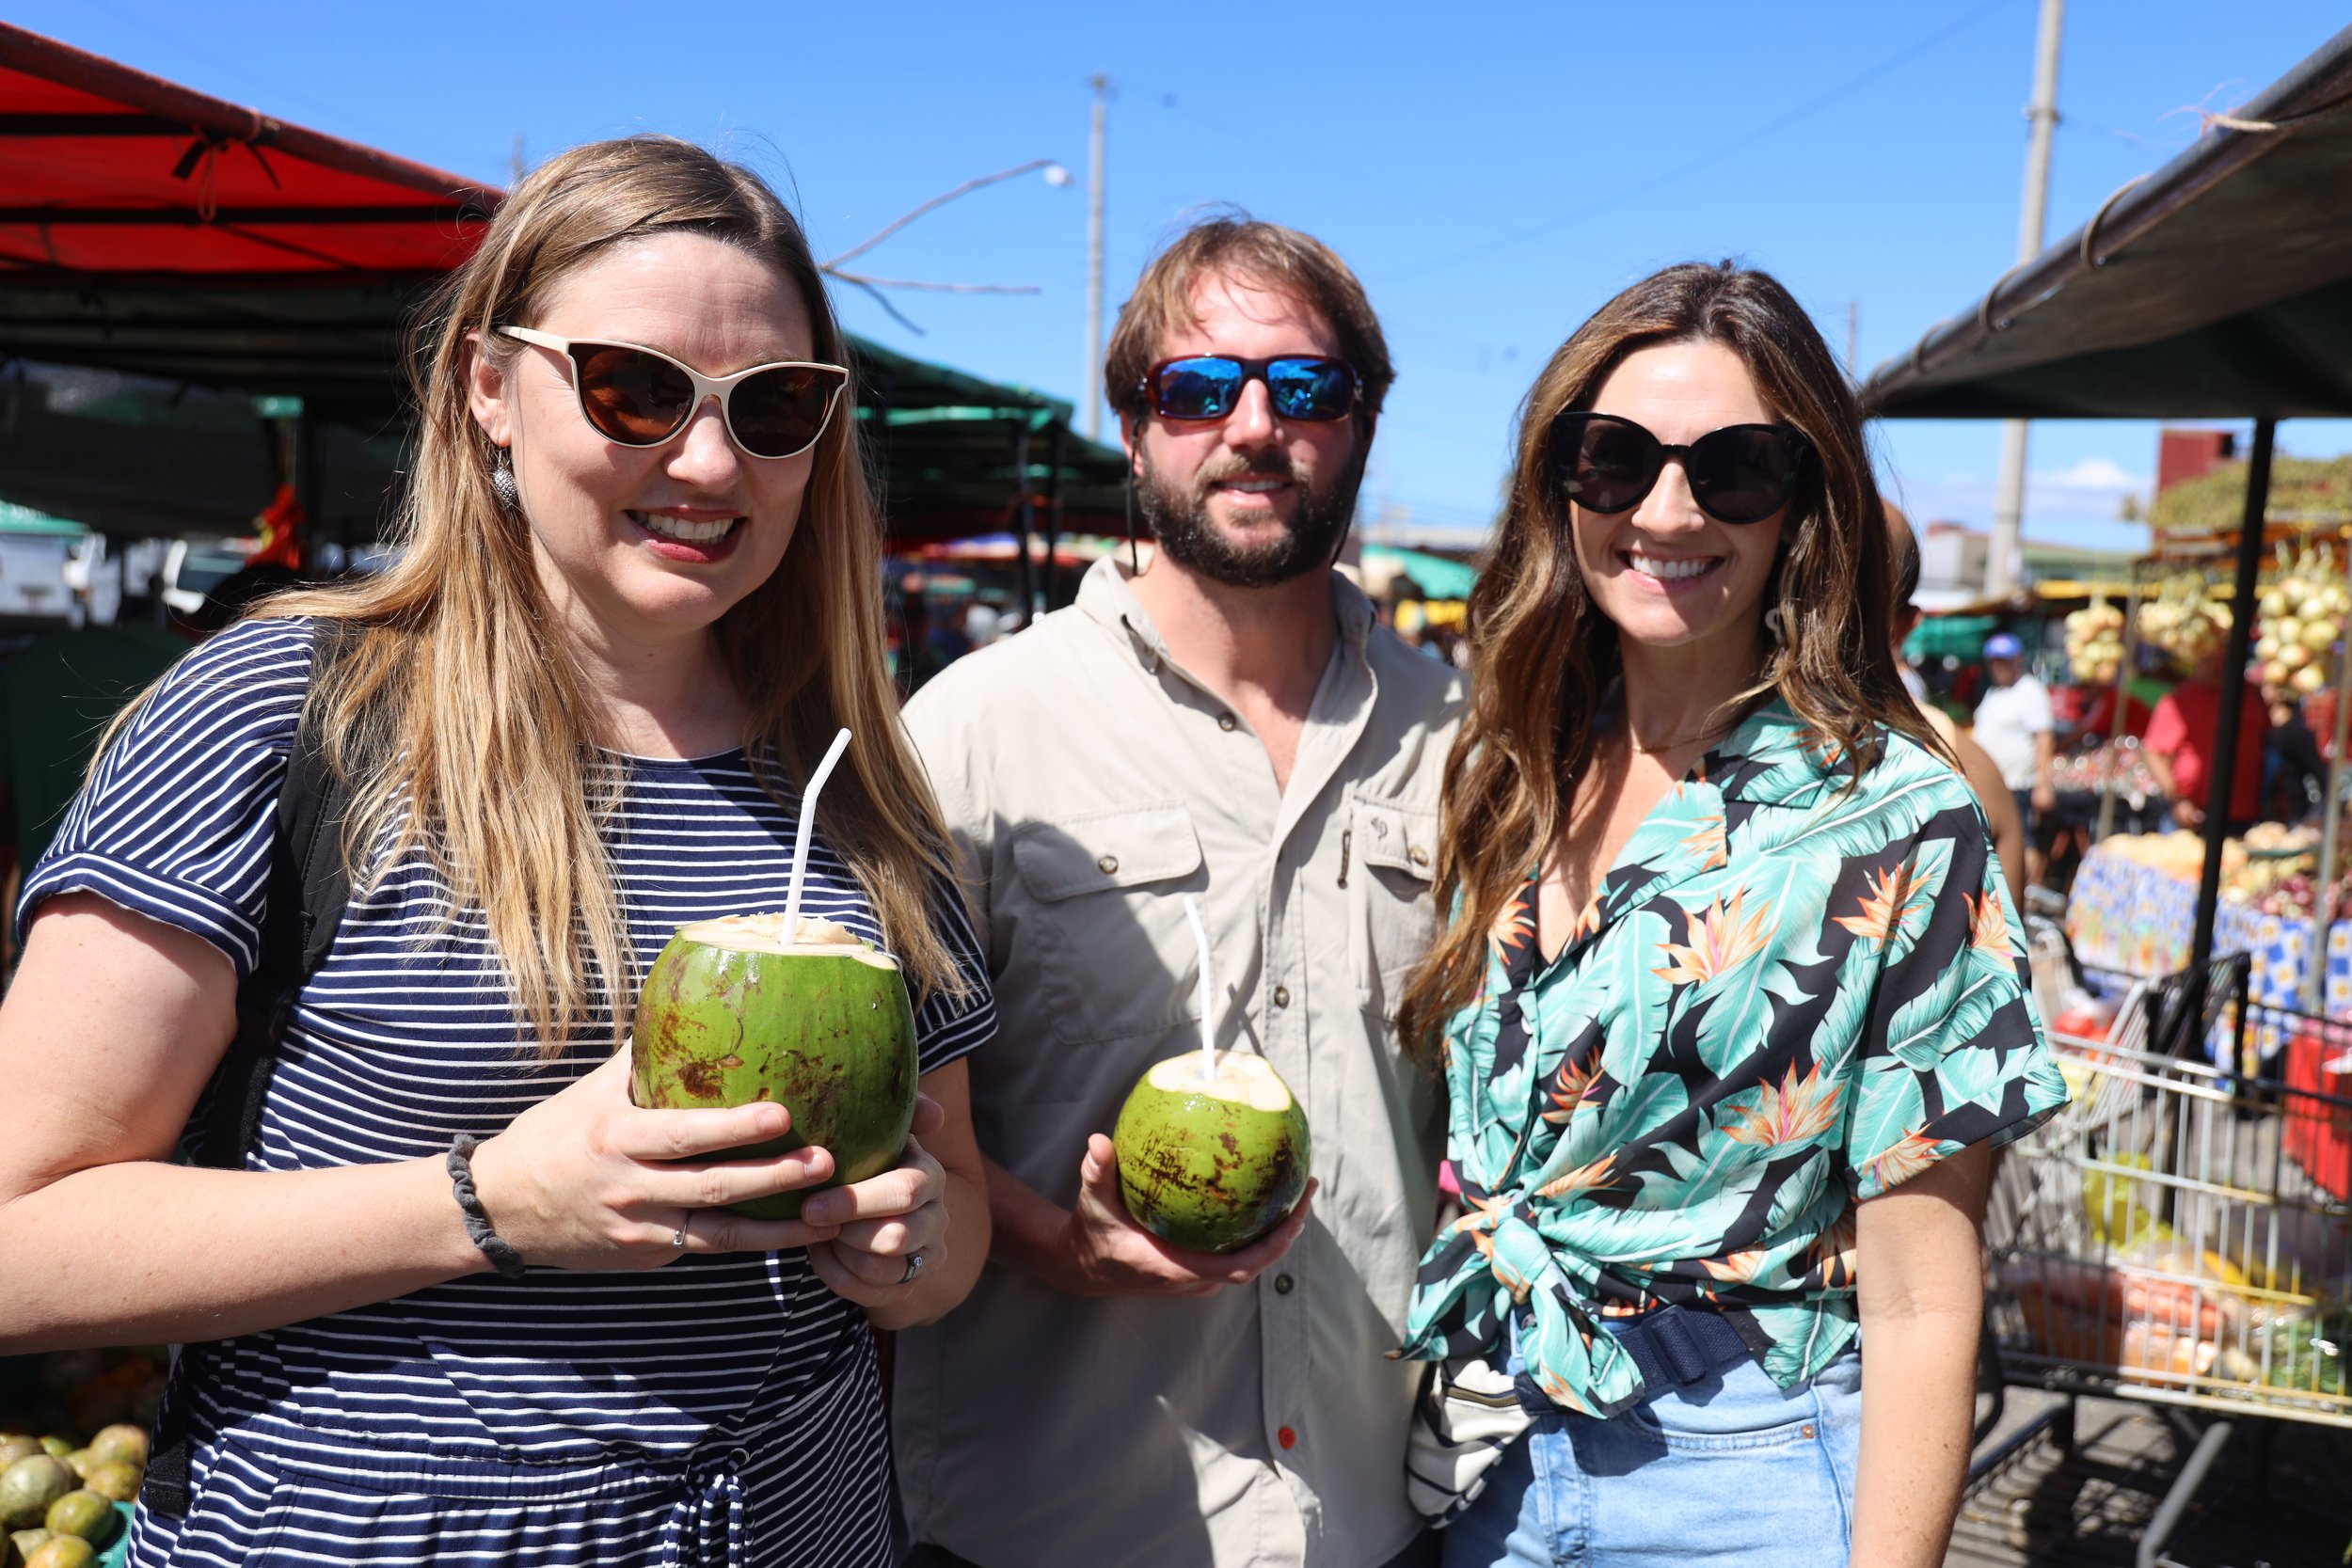  BREADA Director Darlene Rowland was particularly interested in seeing San Jose's farmer's market, as she runs the one in Baton Rouge.&nbsp; Here, she, Will Killen and his wife, Lindsey, enjoy coconut juice direct from the source, bought fresh here a